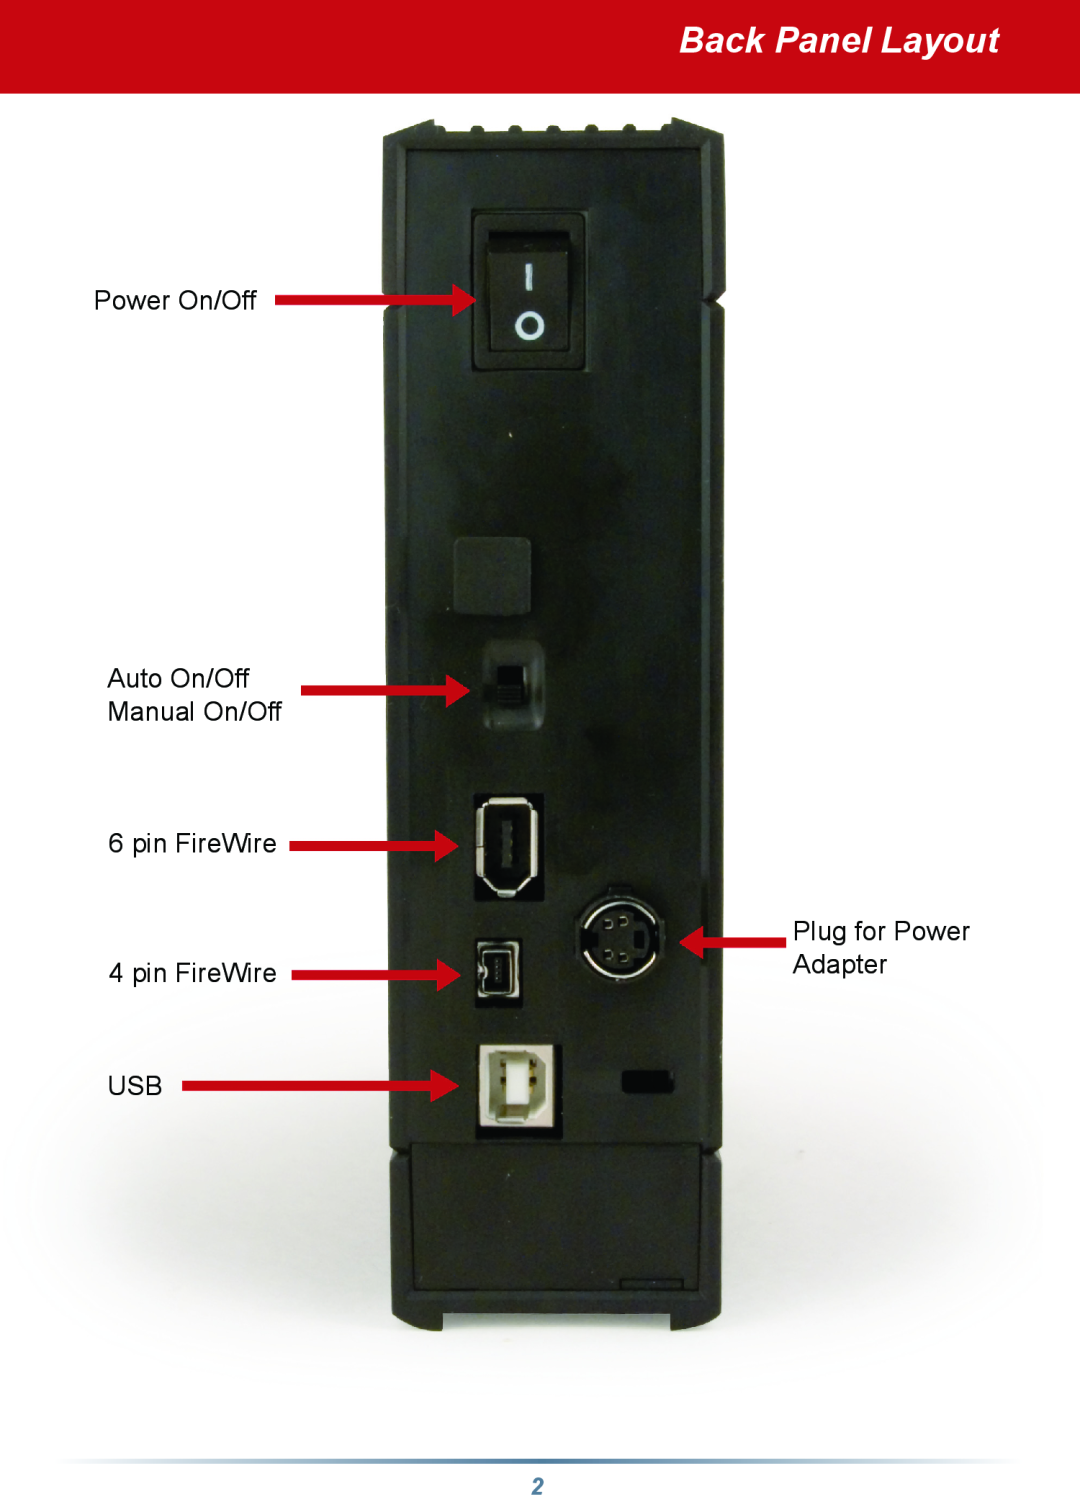 Buffalo Technology v1.1 manual Back Panel Layout, Power On/Off Auto On/Off Manual On/Off, pin FireWire, Adapter 